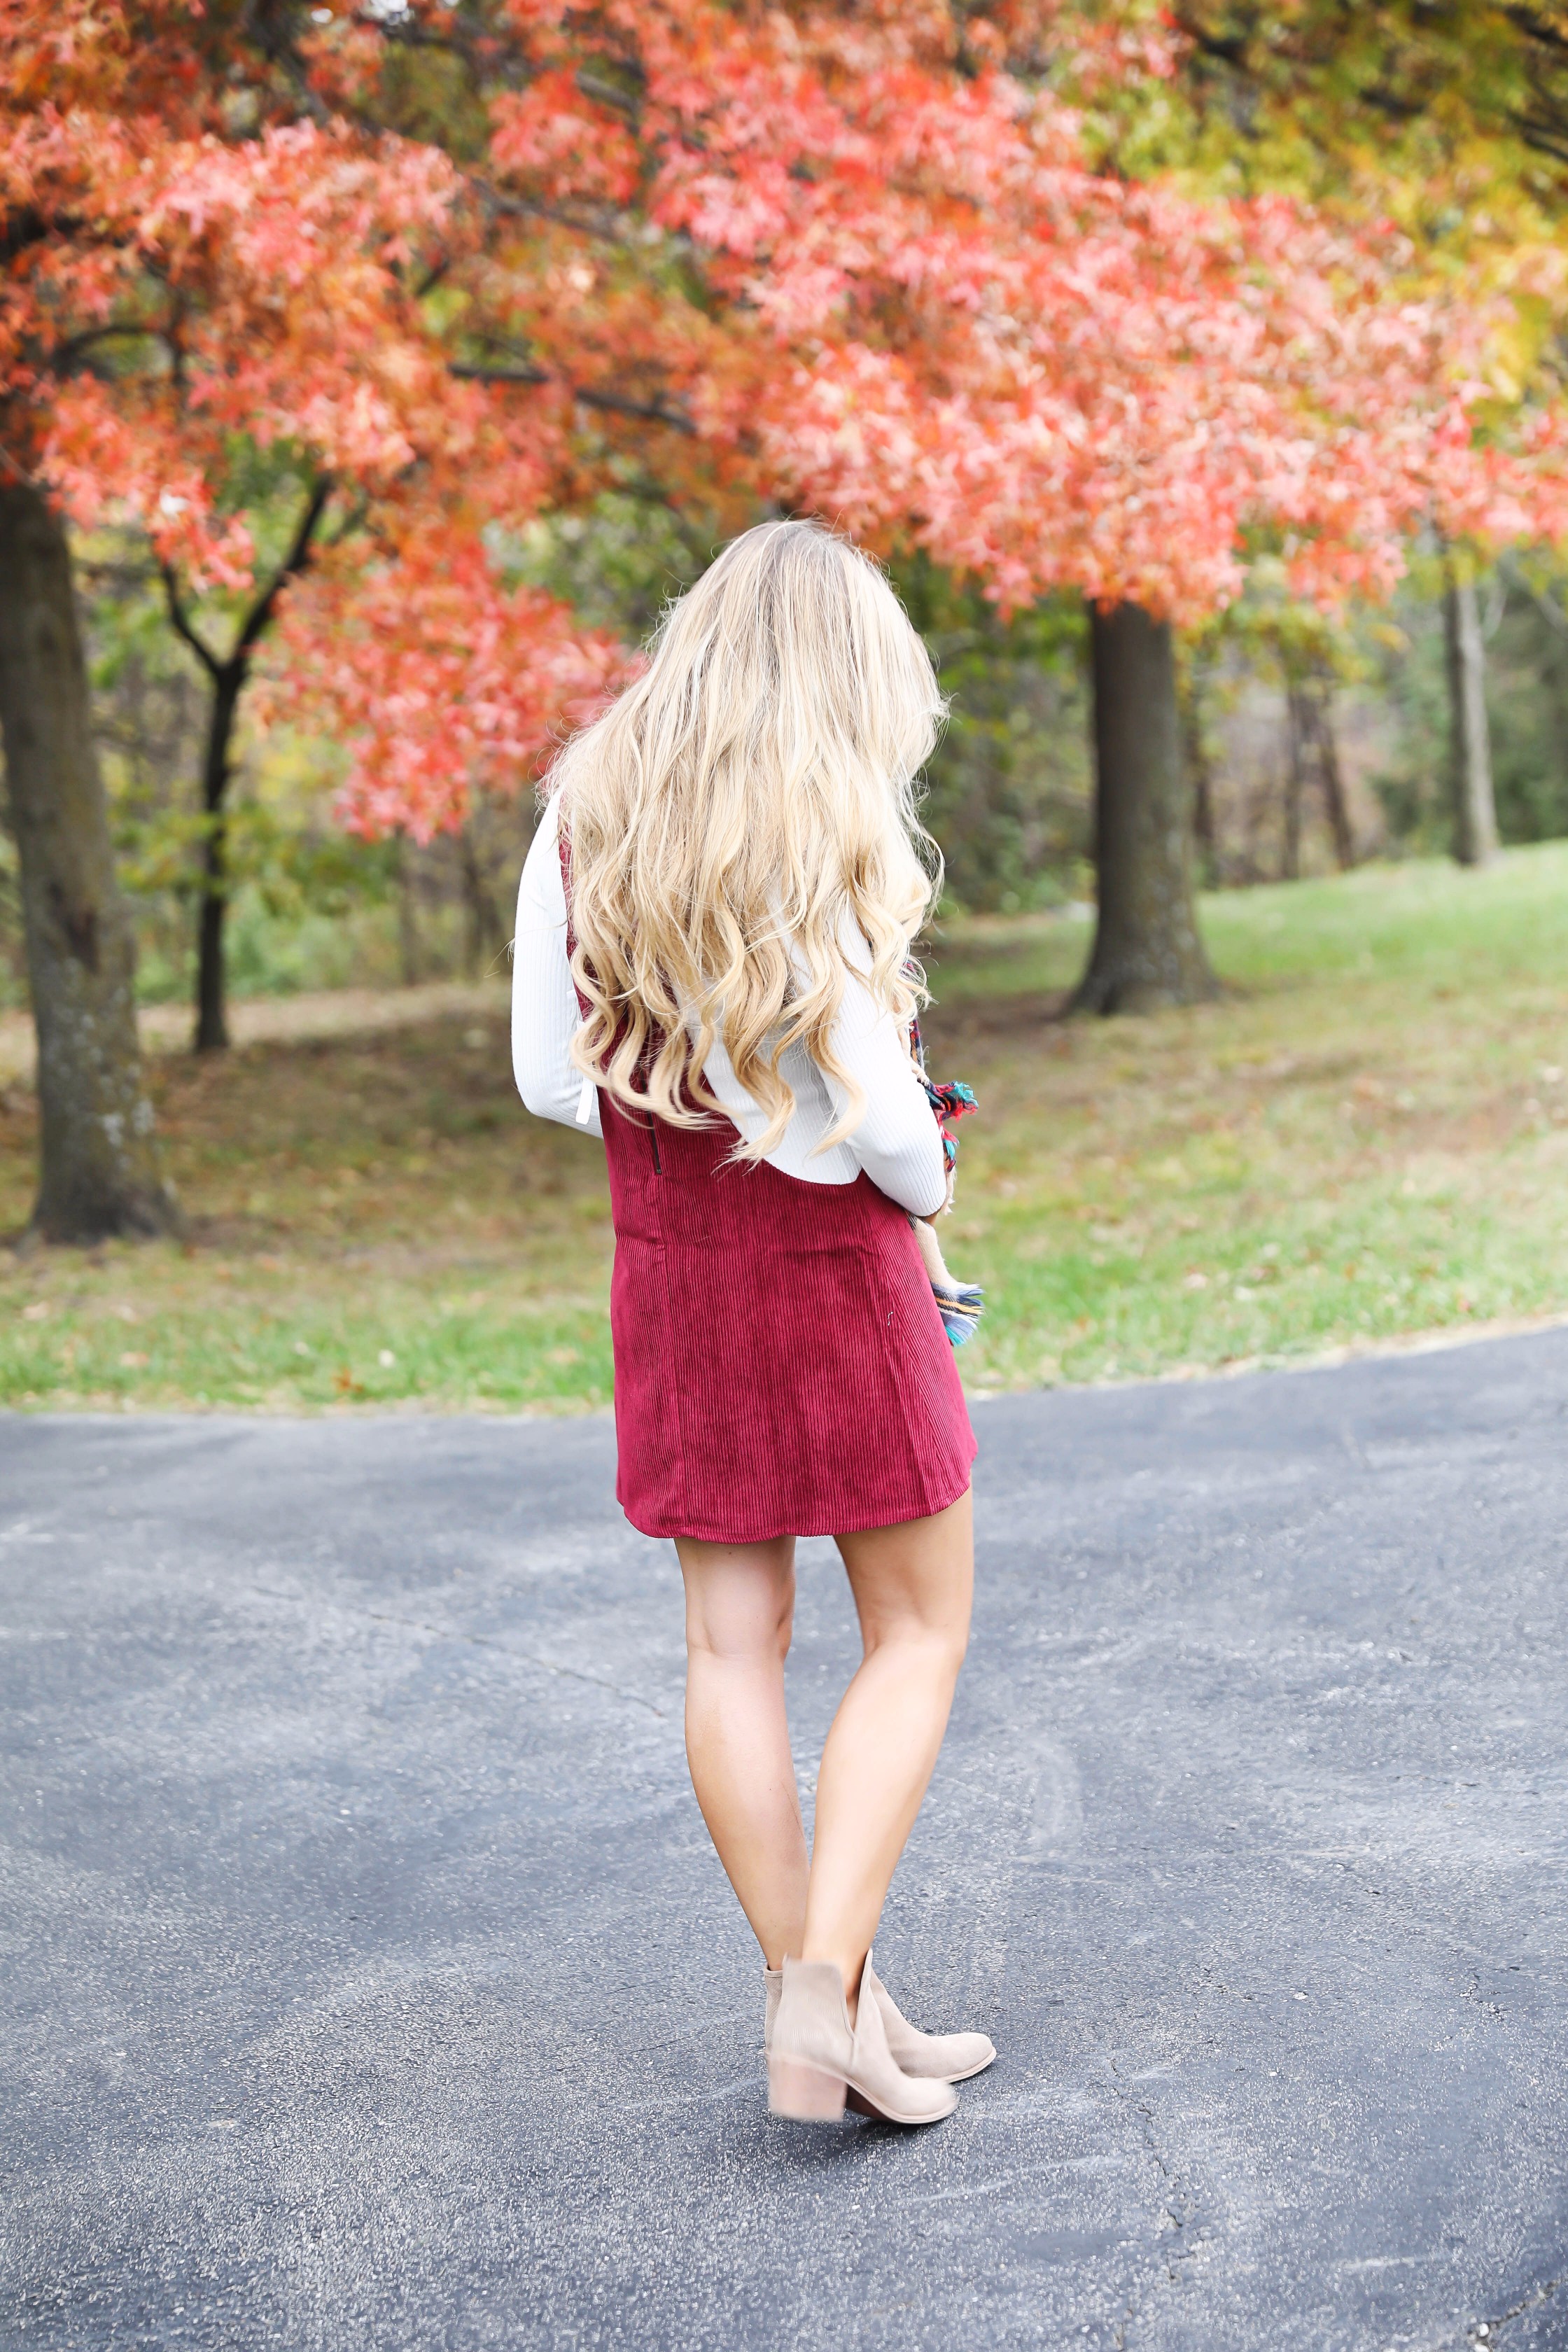 Red corduroy overall dress with white turtleneck and blanket scarf! The cutest fall outfit for a fall trees and foliage photoshoot! Get details on fashion blog daily dose of charm lauren lindmark